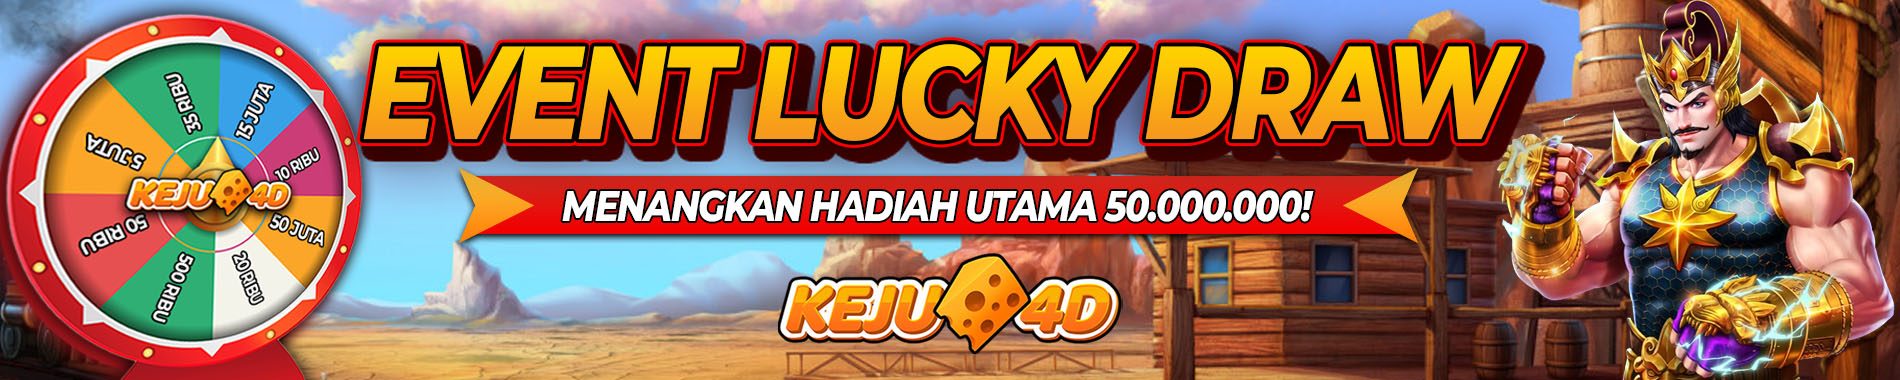 EVENT LUCKY DRAW